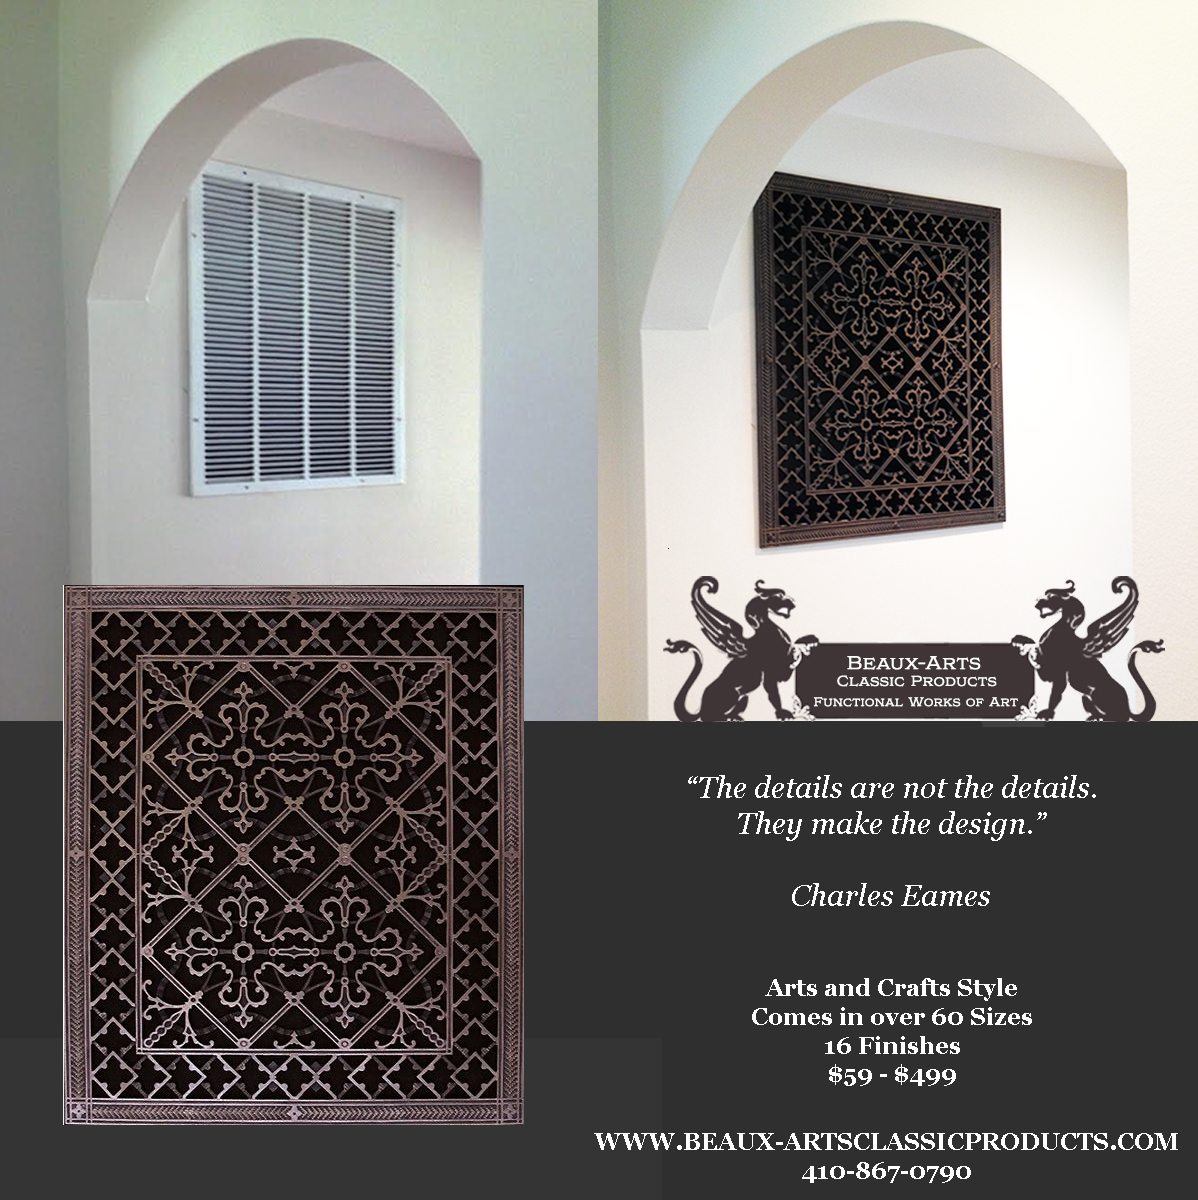 Customer Before and After pictures of Arts and Crafts Decorative Vent Cover